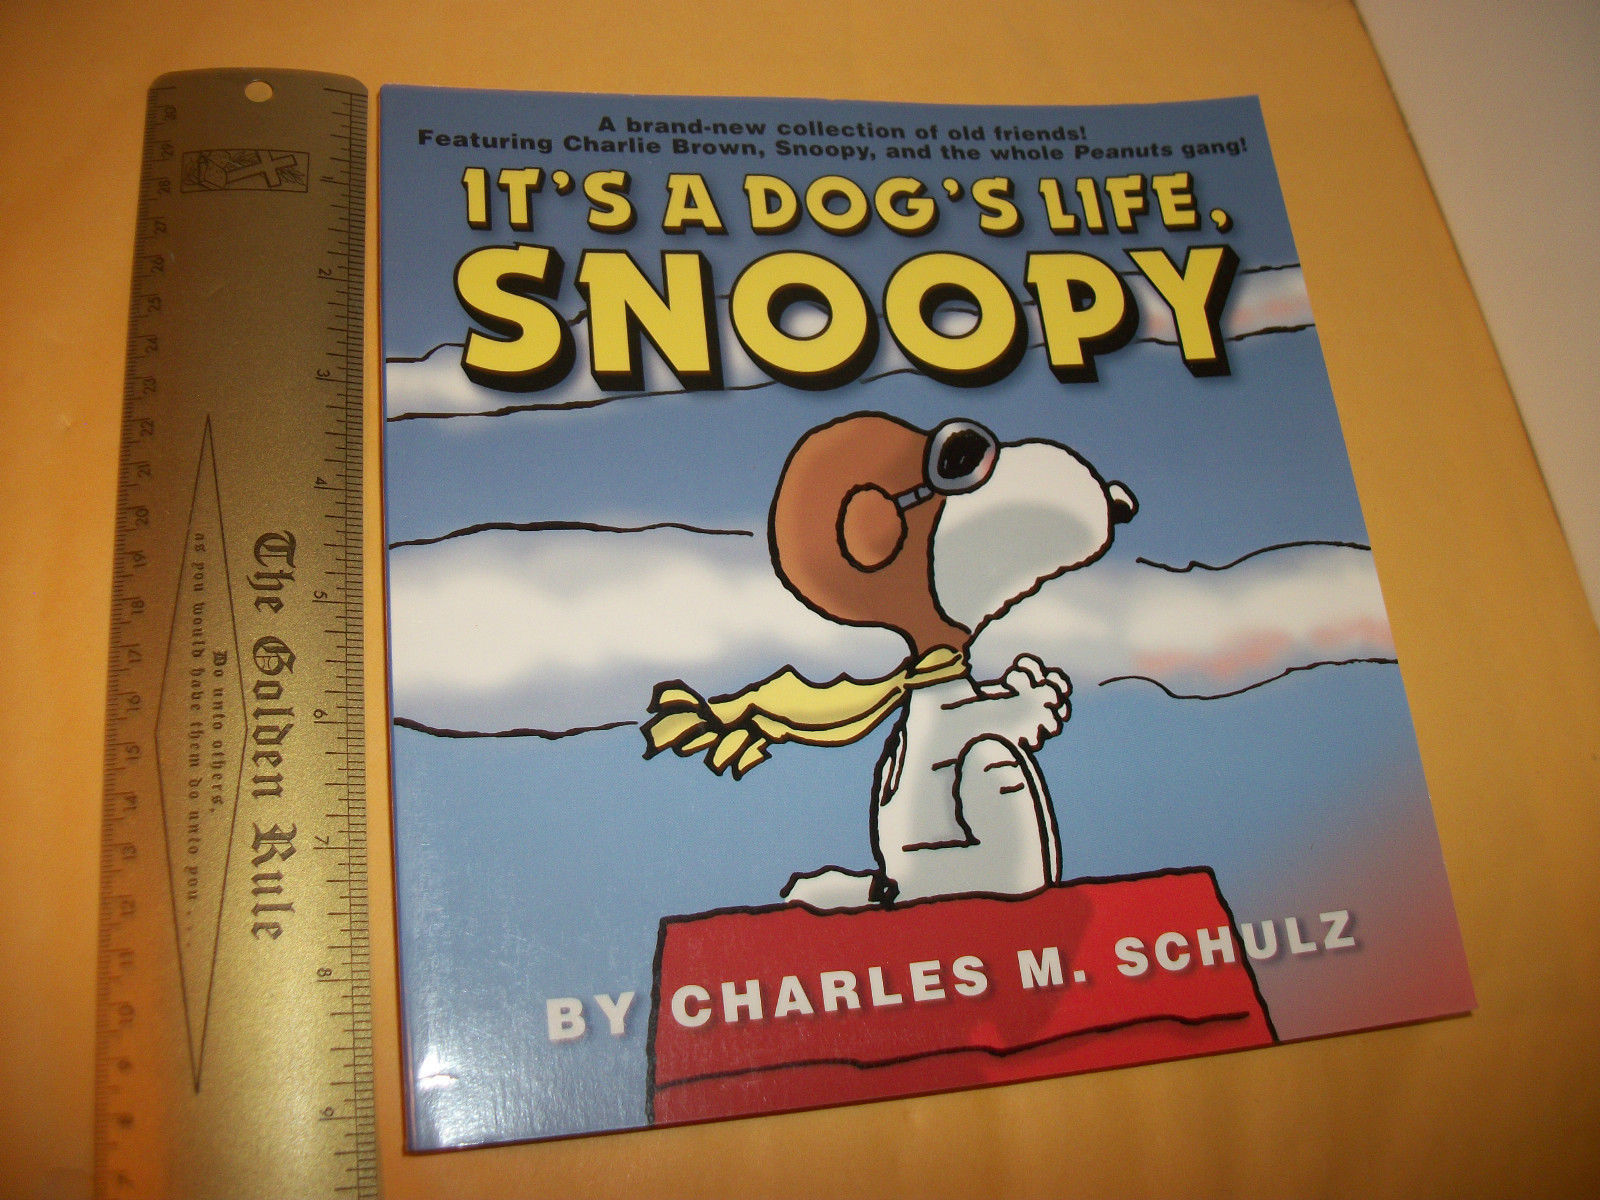 Peanuts Gang Snoopy Book It's a Dog's Life Comic Strips Cartoon Collection New - $11.39